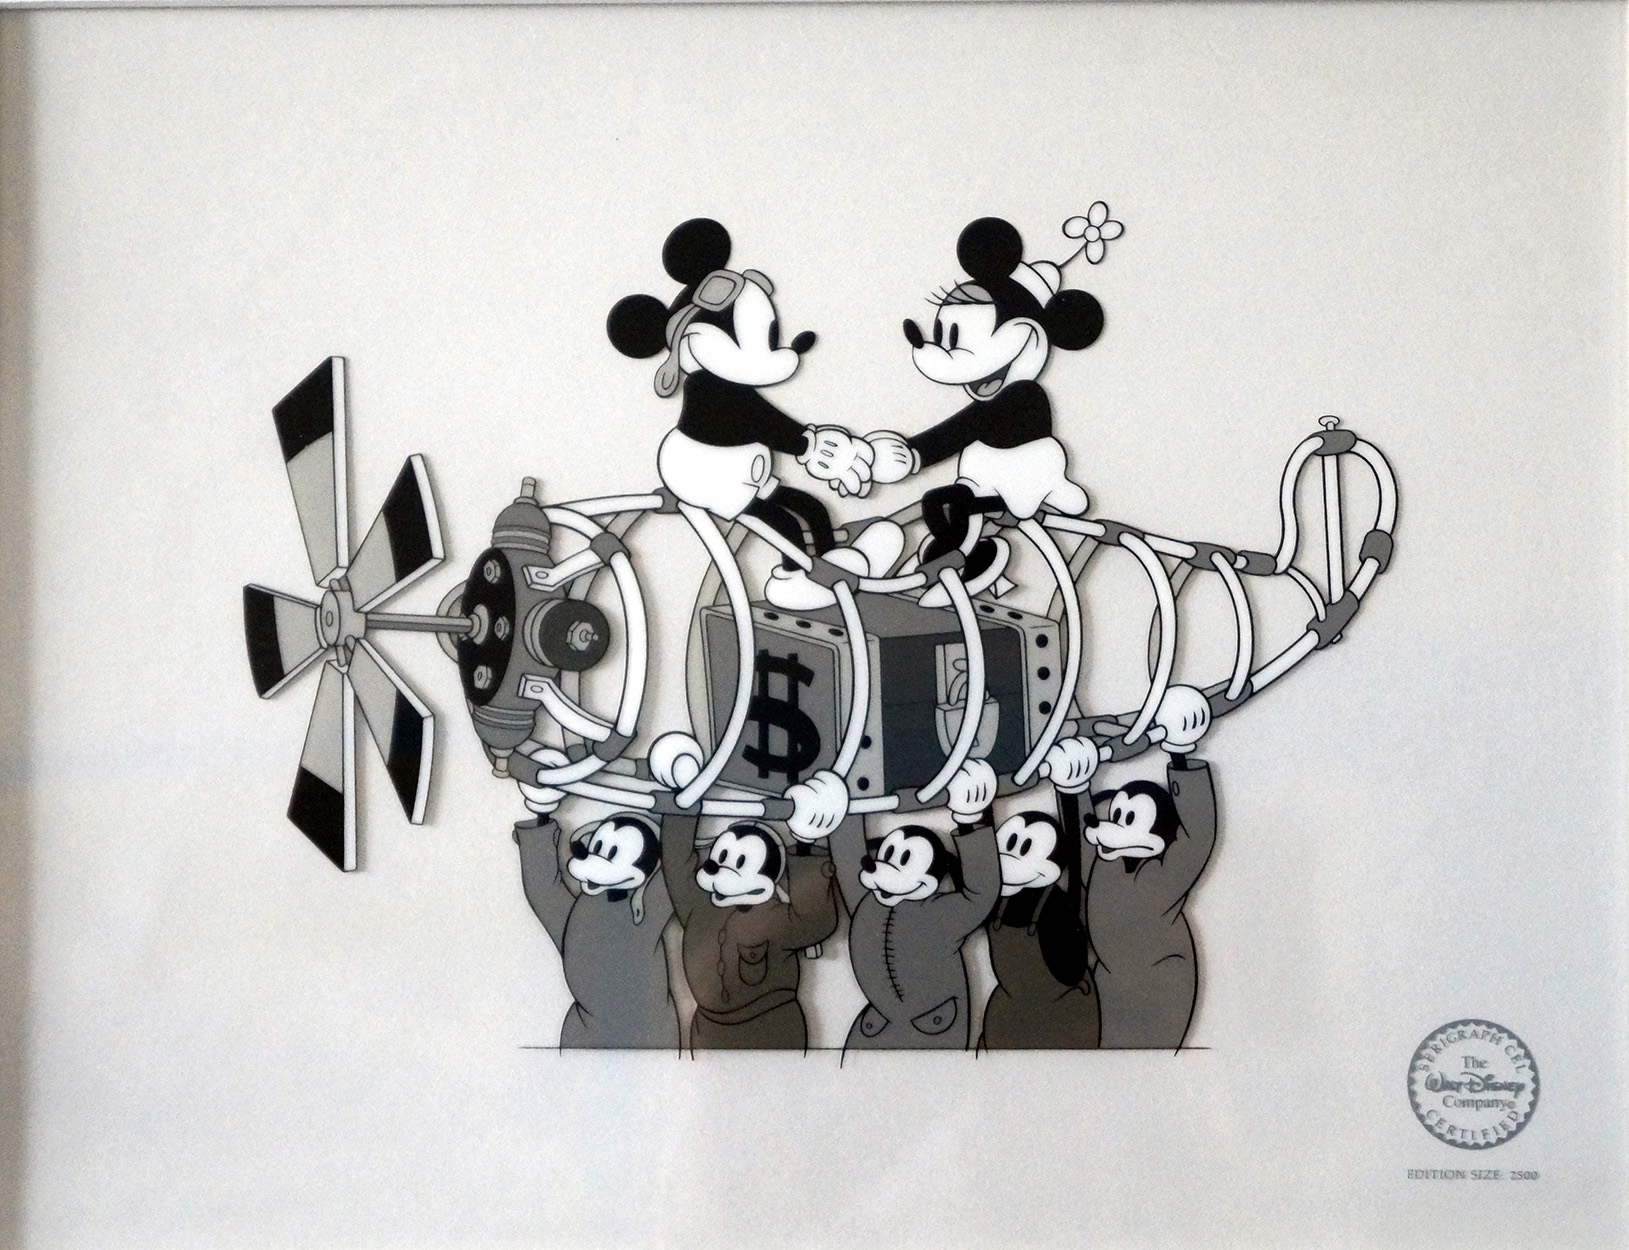 saalfield mickey mouse the mail pilot